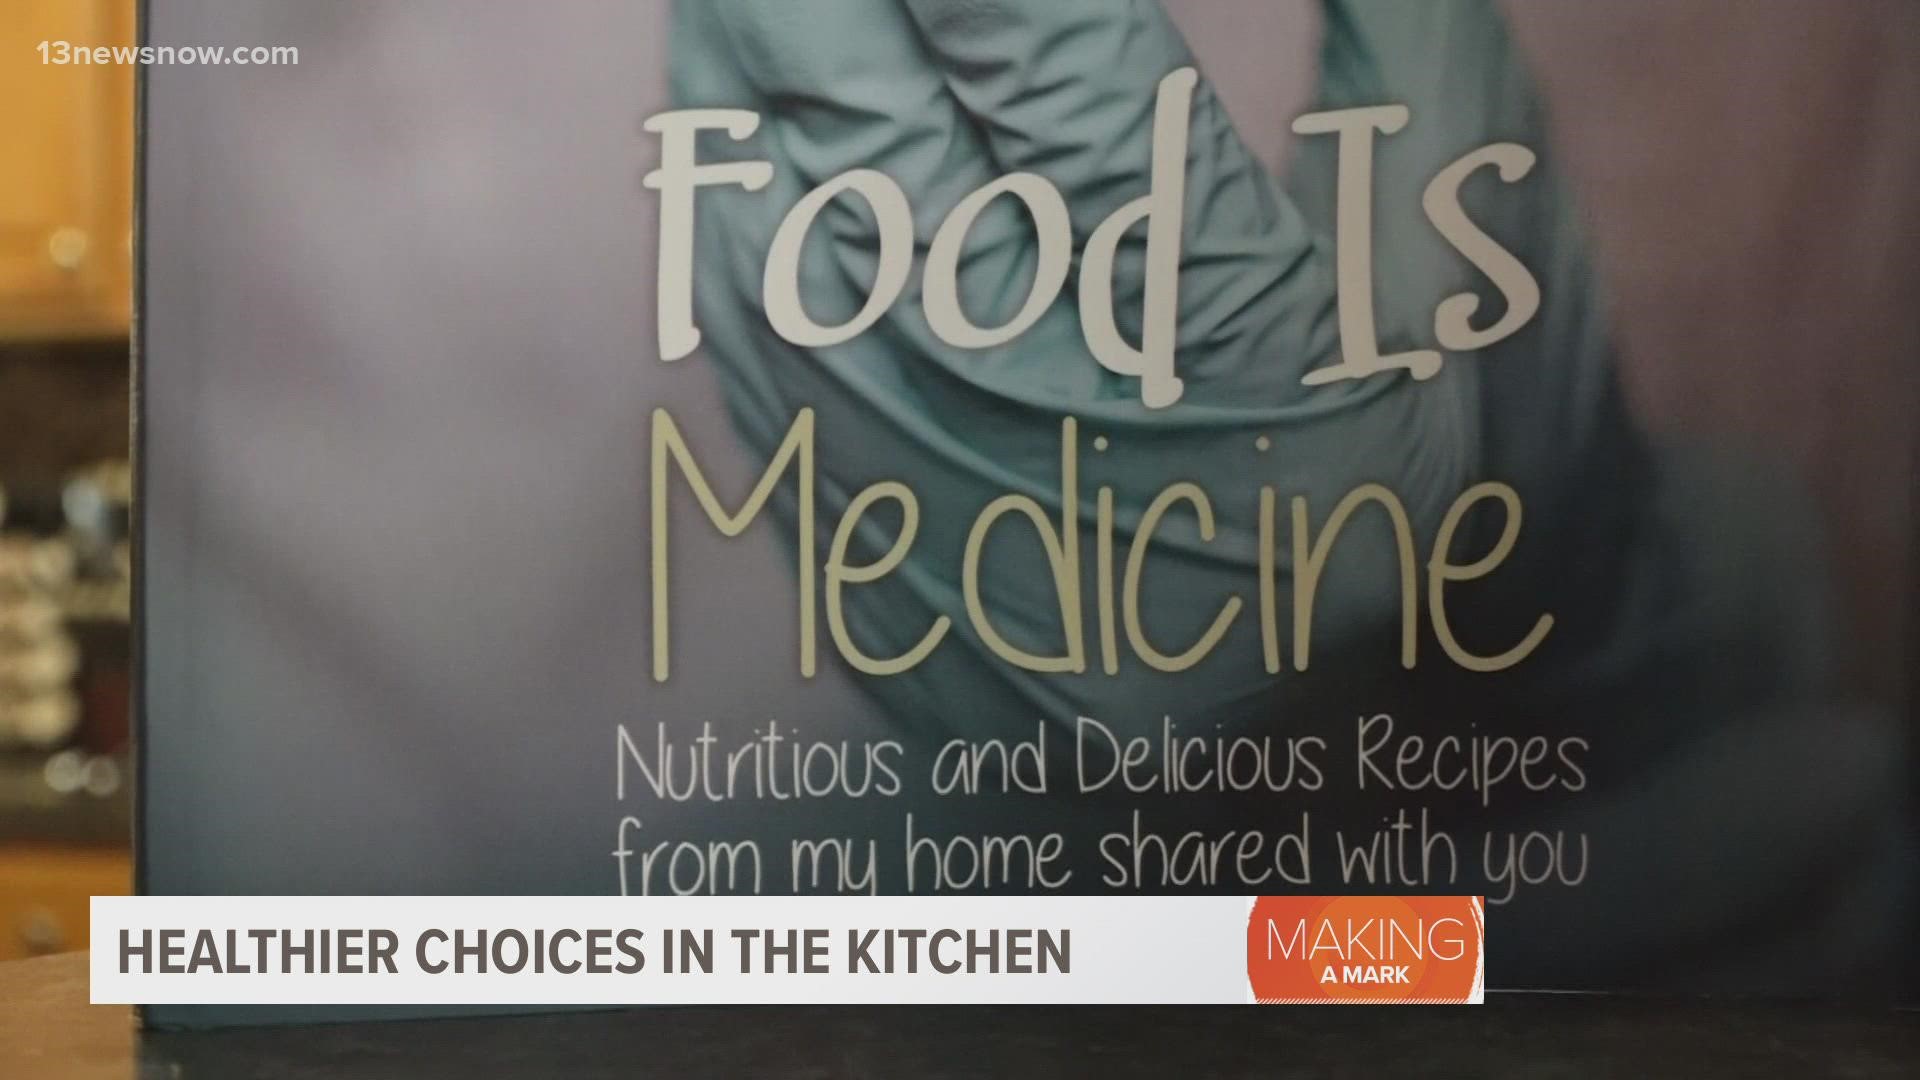 Jada Johnson from Chesapeake is sharing the importance of a nutritional diet in her book, called "Food is Medicine."